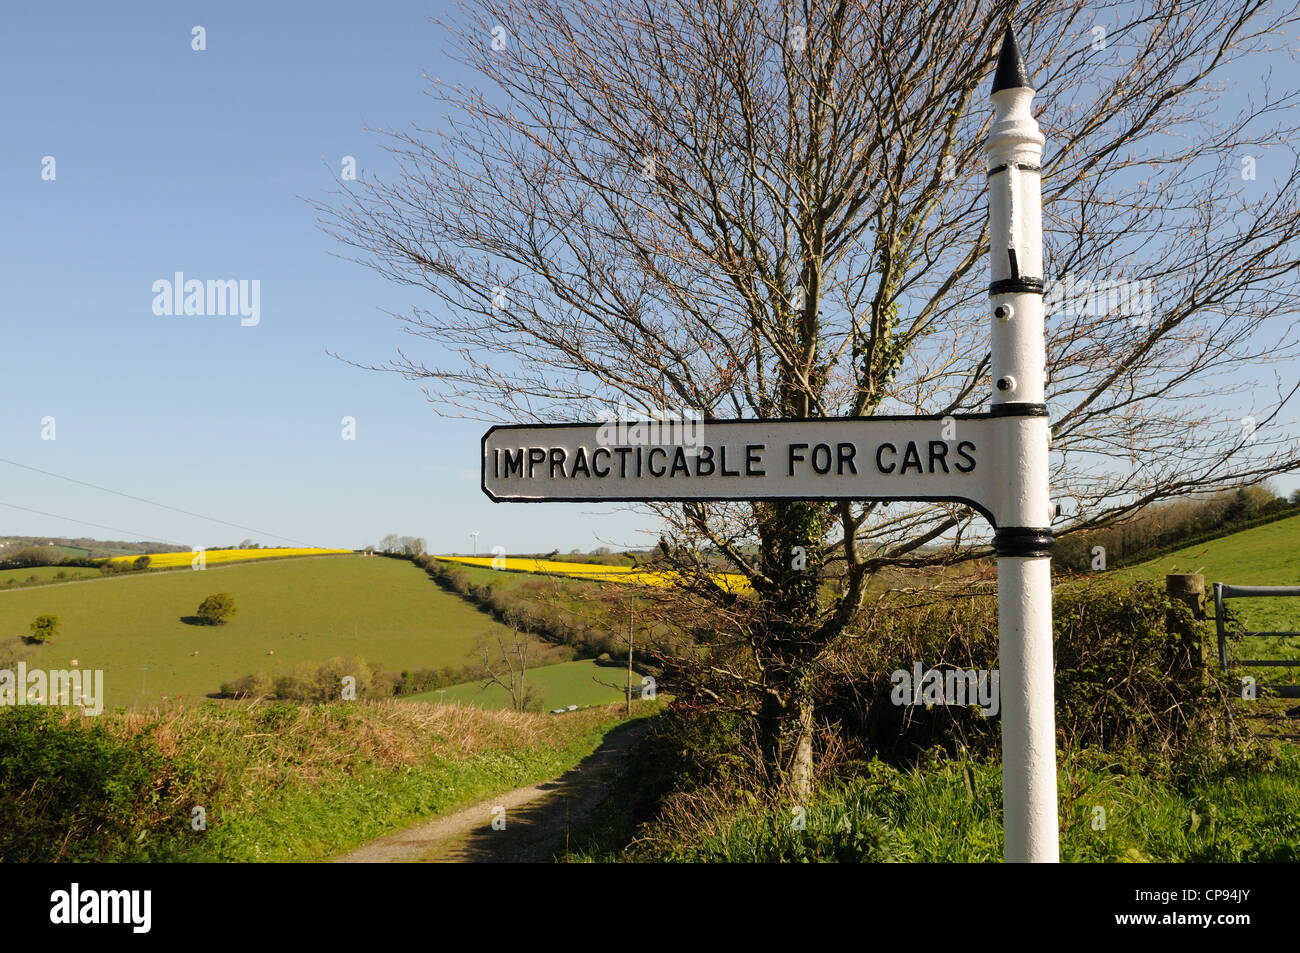 Road sign near Lerryn Cornwall Impracticable For Cars England UK GB Stock Photo